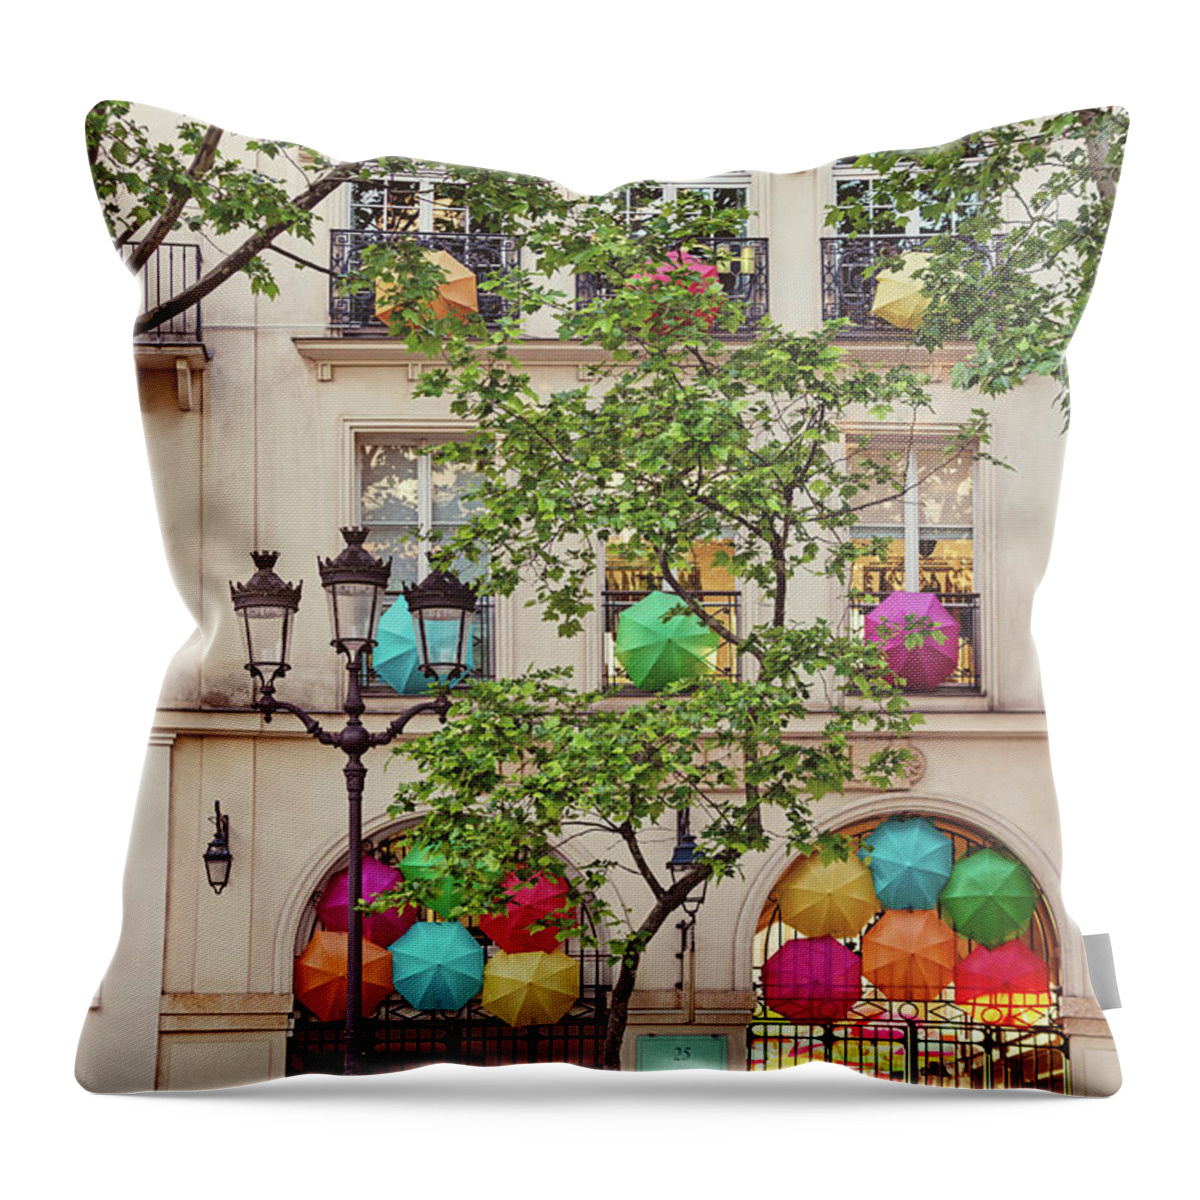 Le Village Royal Throw Pillow featuring the photograph Village Royal by Melanie Alexandra Price